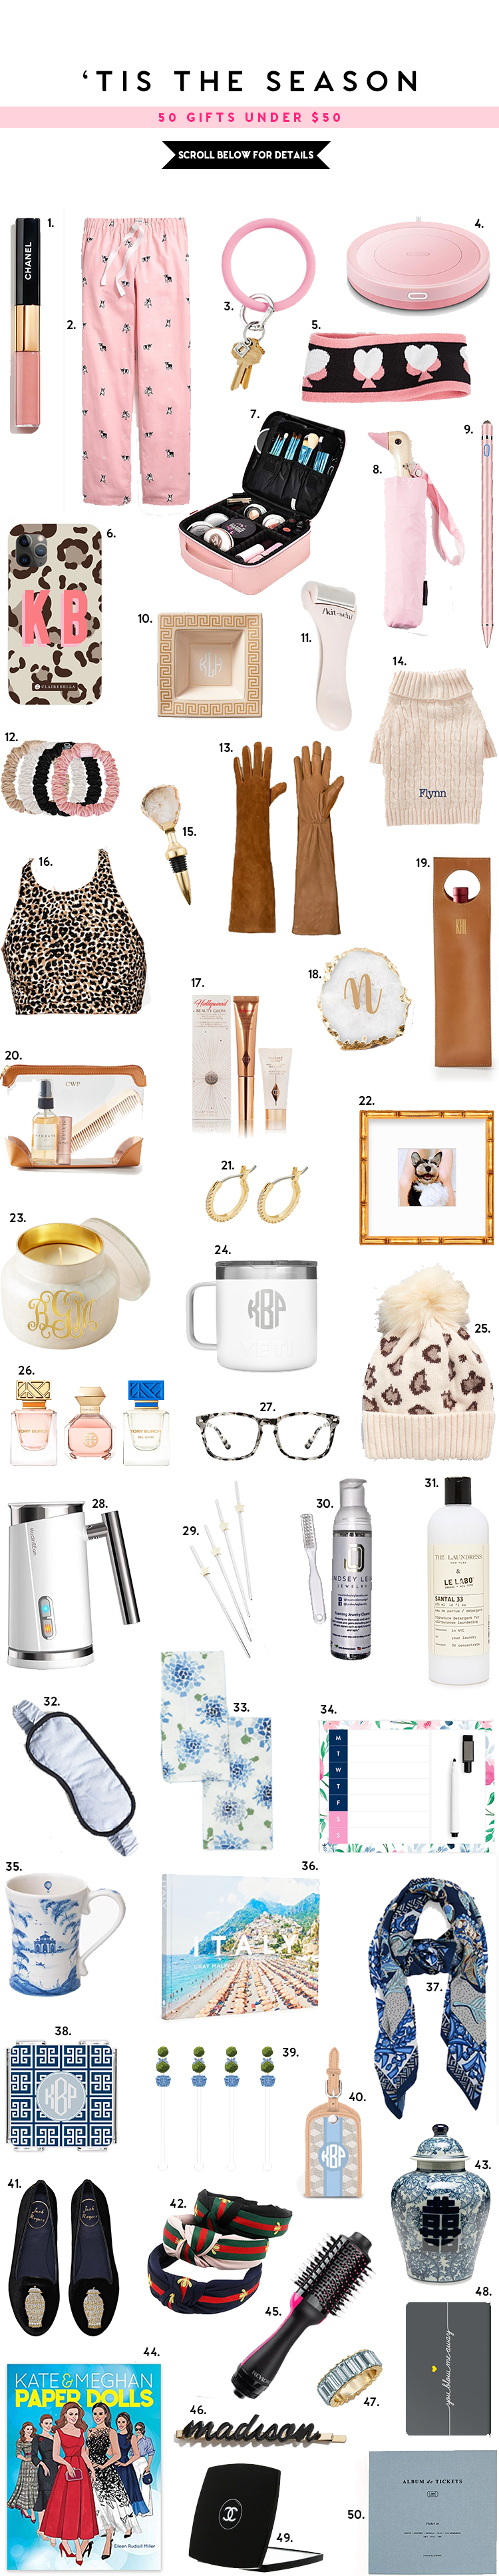 under $50 gift guide for her